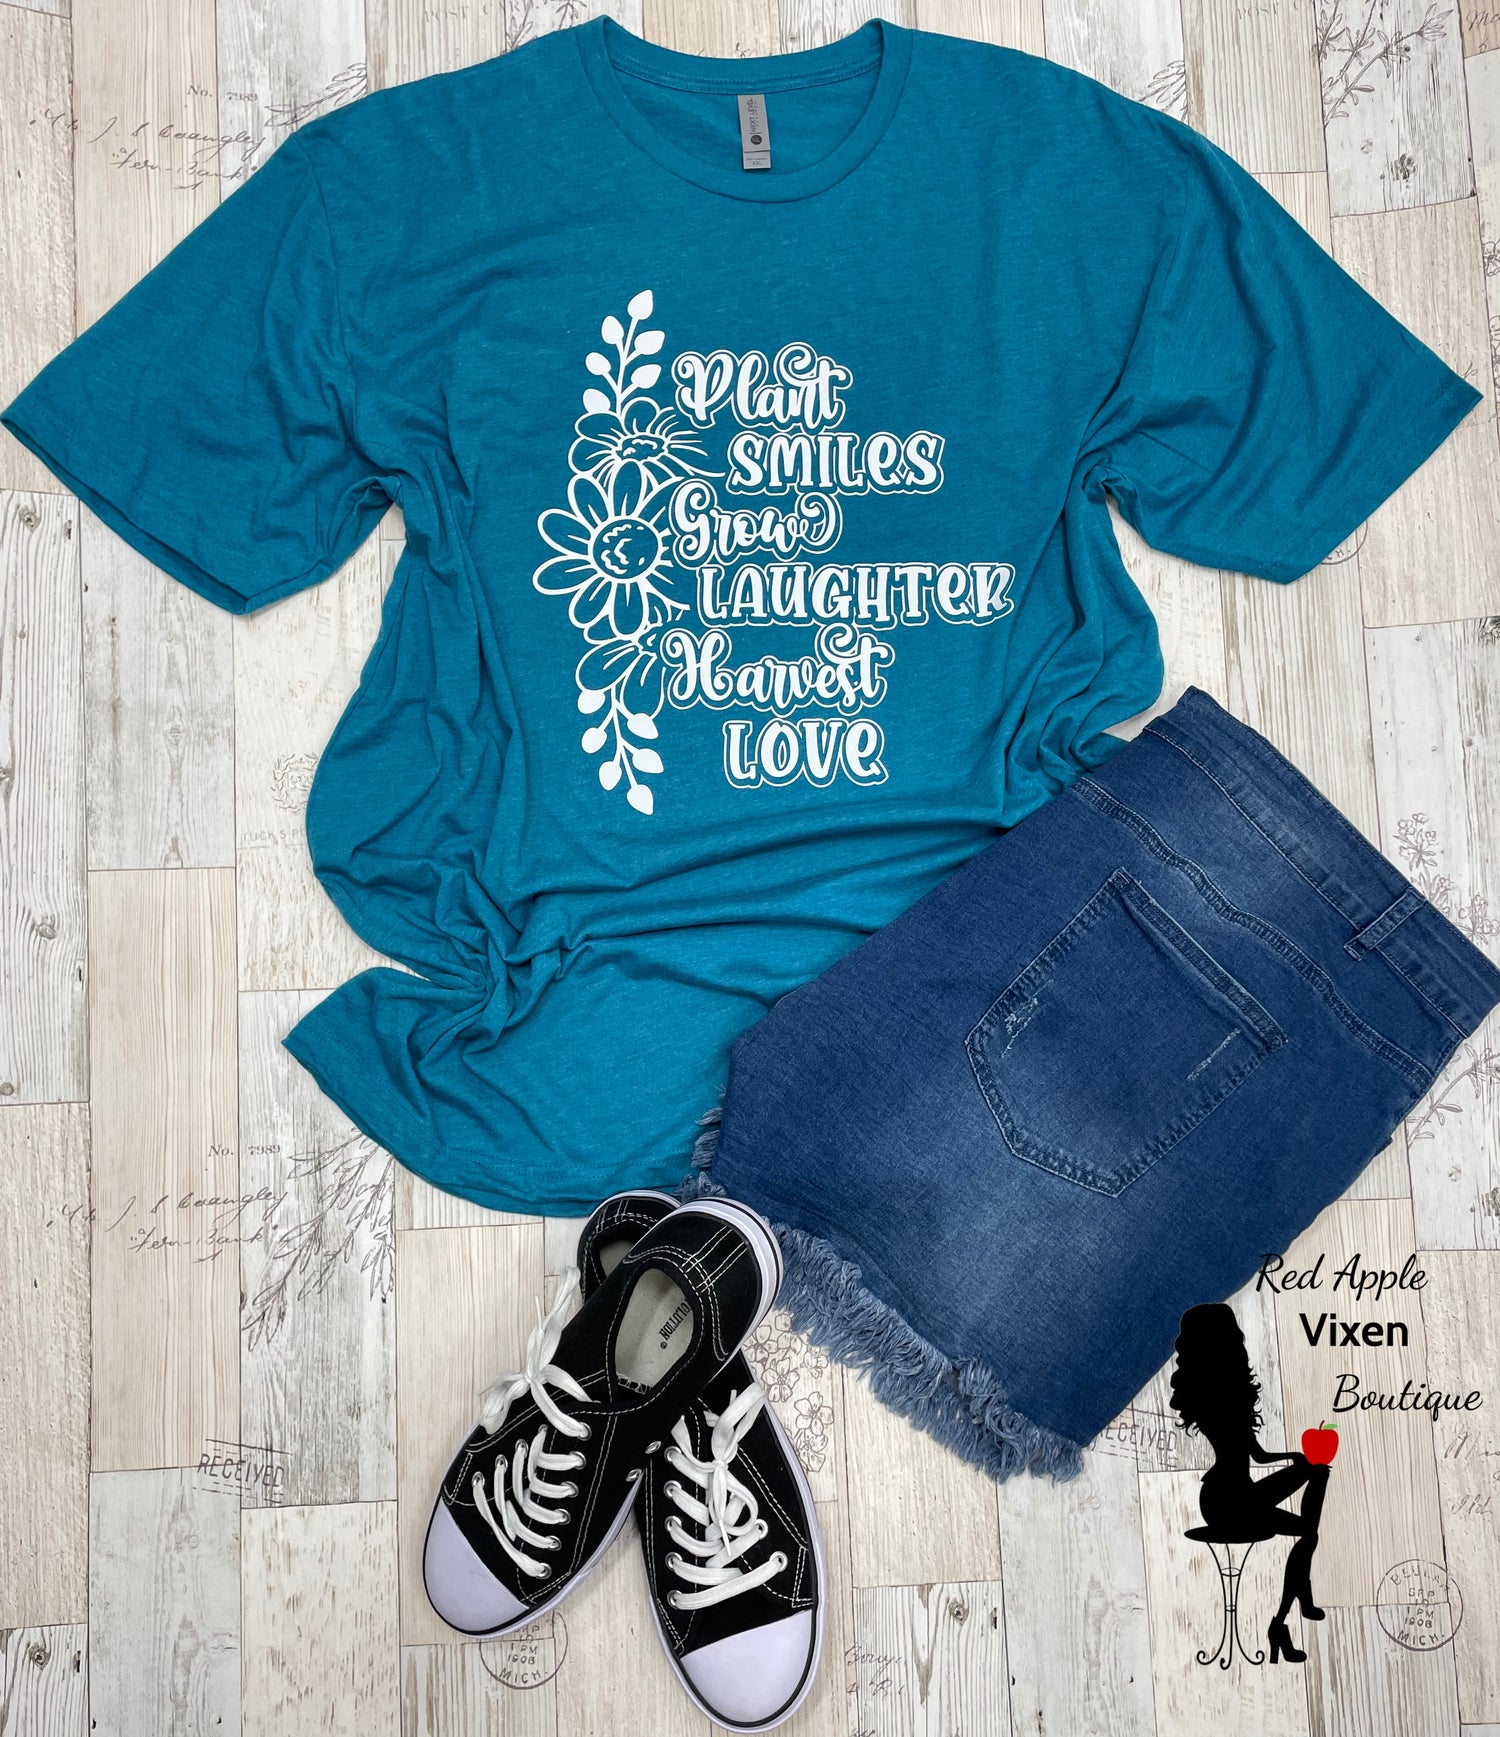 Plant Smiles, Grow Laughter Harvest Love Graphic Tee - Sassy Chick Clothing